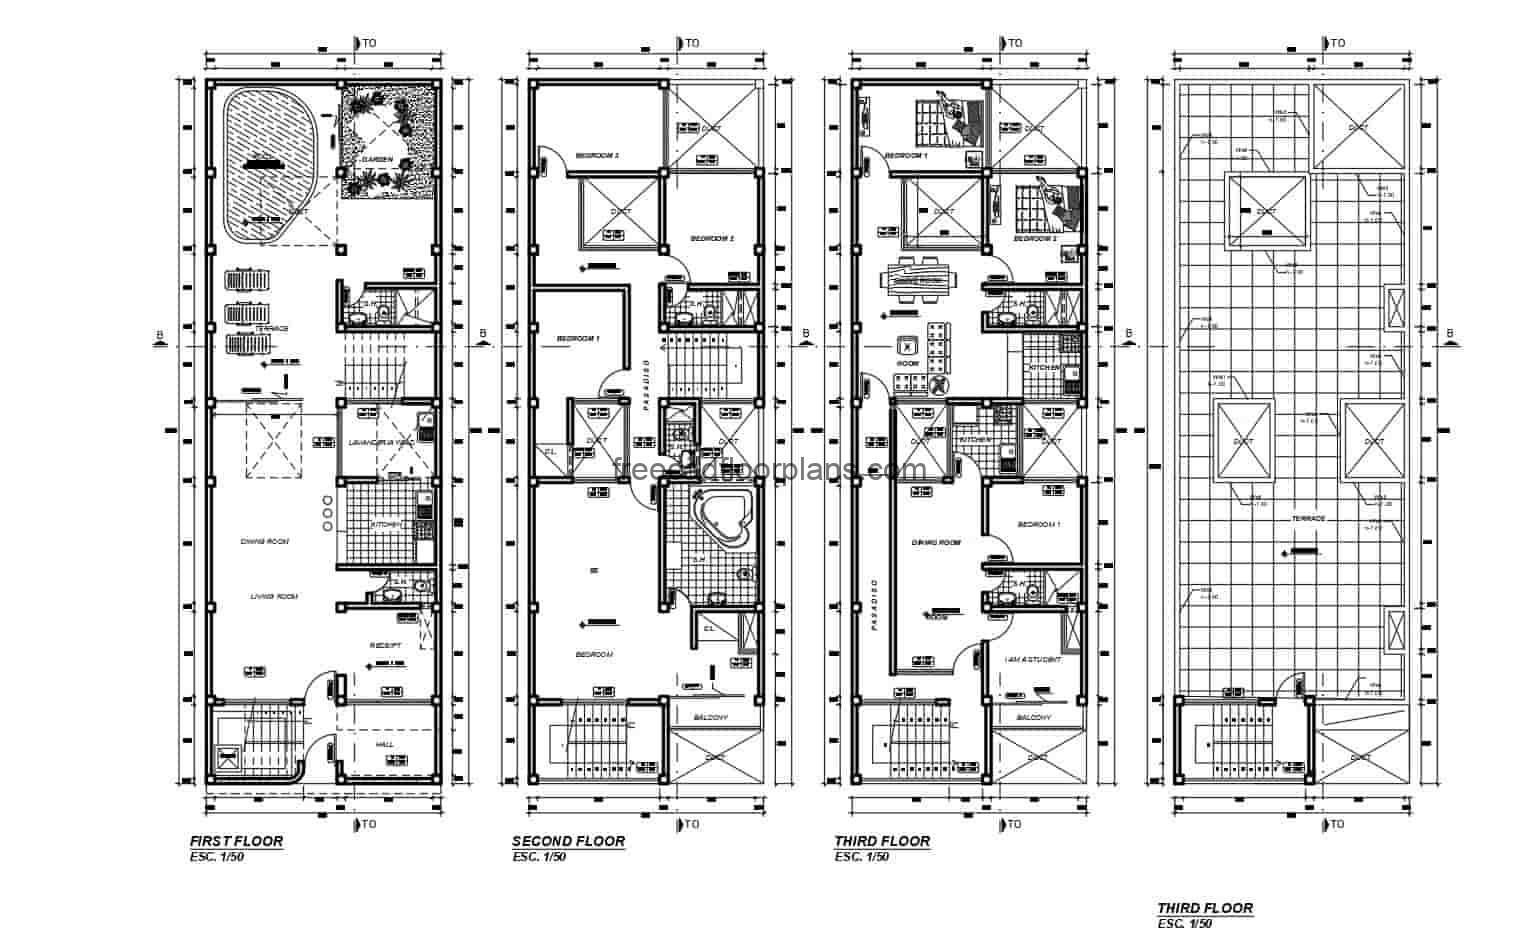 Architectural 2D plans and dimensioning of the residence of three levels in Autocad DWG format, the residence in the first floor has a social area with living room, kitchen, dining room, laundry area, garden and pool area. Second and third levels have six bedrooms in total and a common terrace area for the building. 2D blueprints for free download.